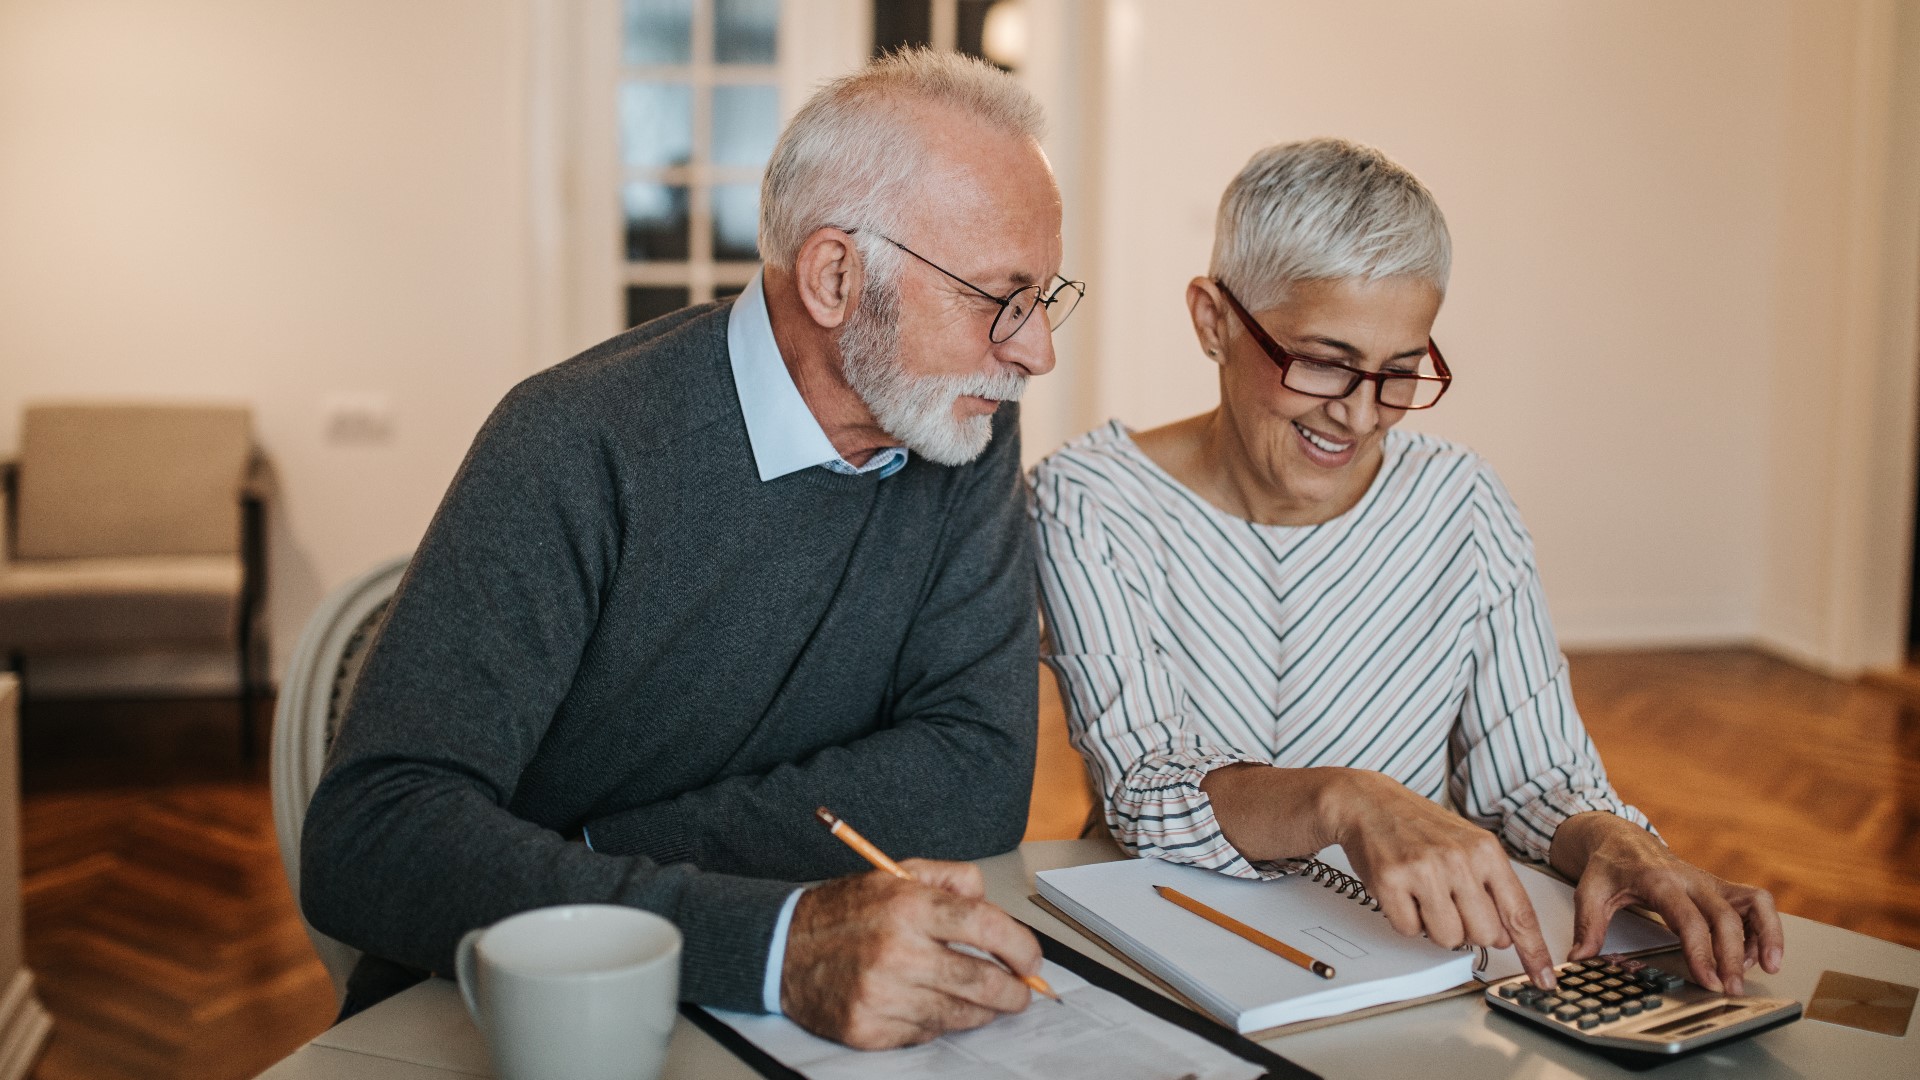 Managing and understanding risks is key to a comfortable retirement. Sponsored by Leverage Planners.